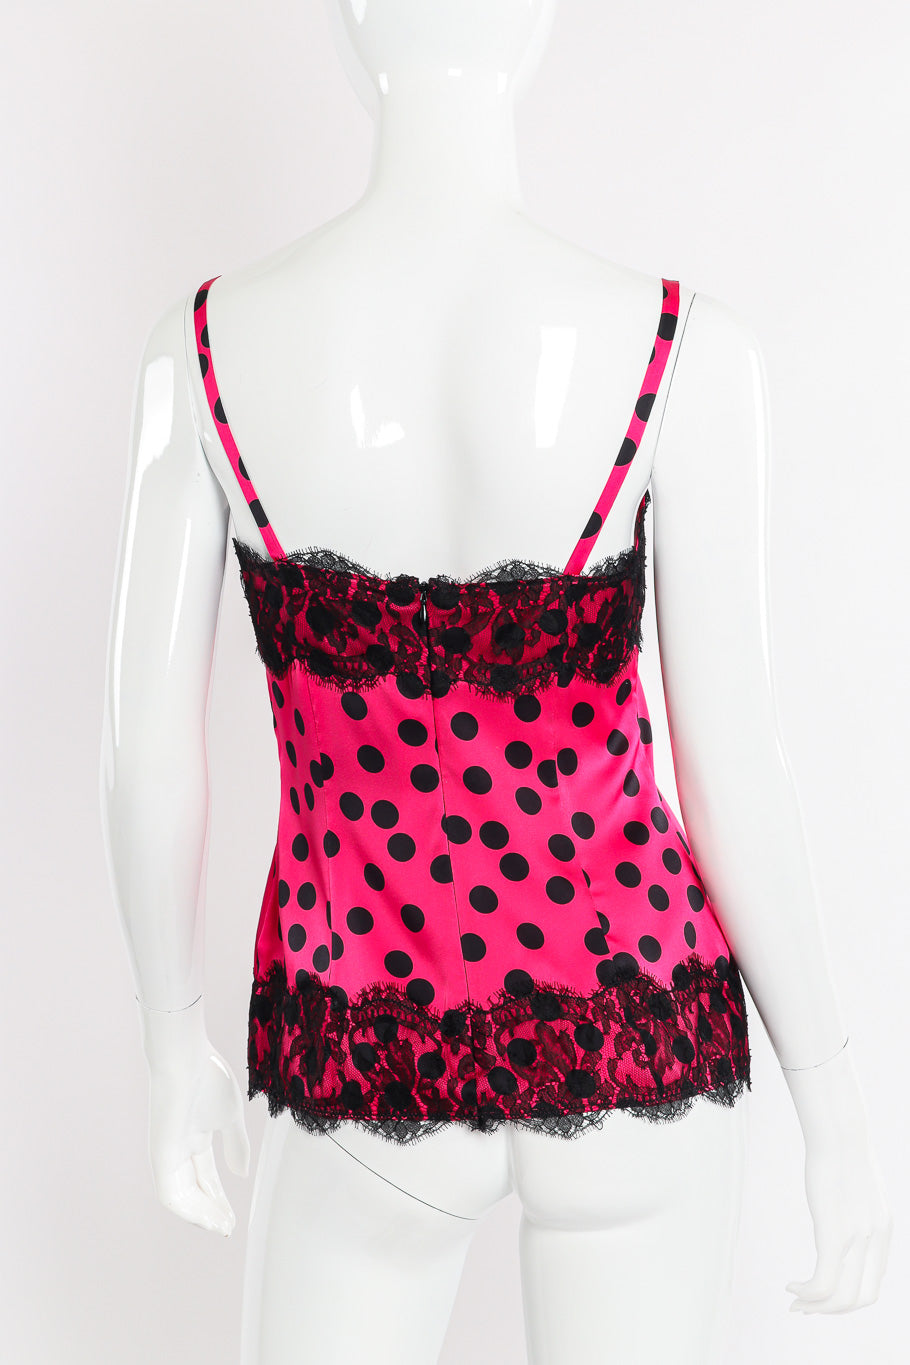 Lace trim camisole by Dolce & Gabbana on mannequin back @recessla